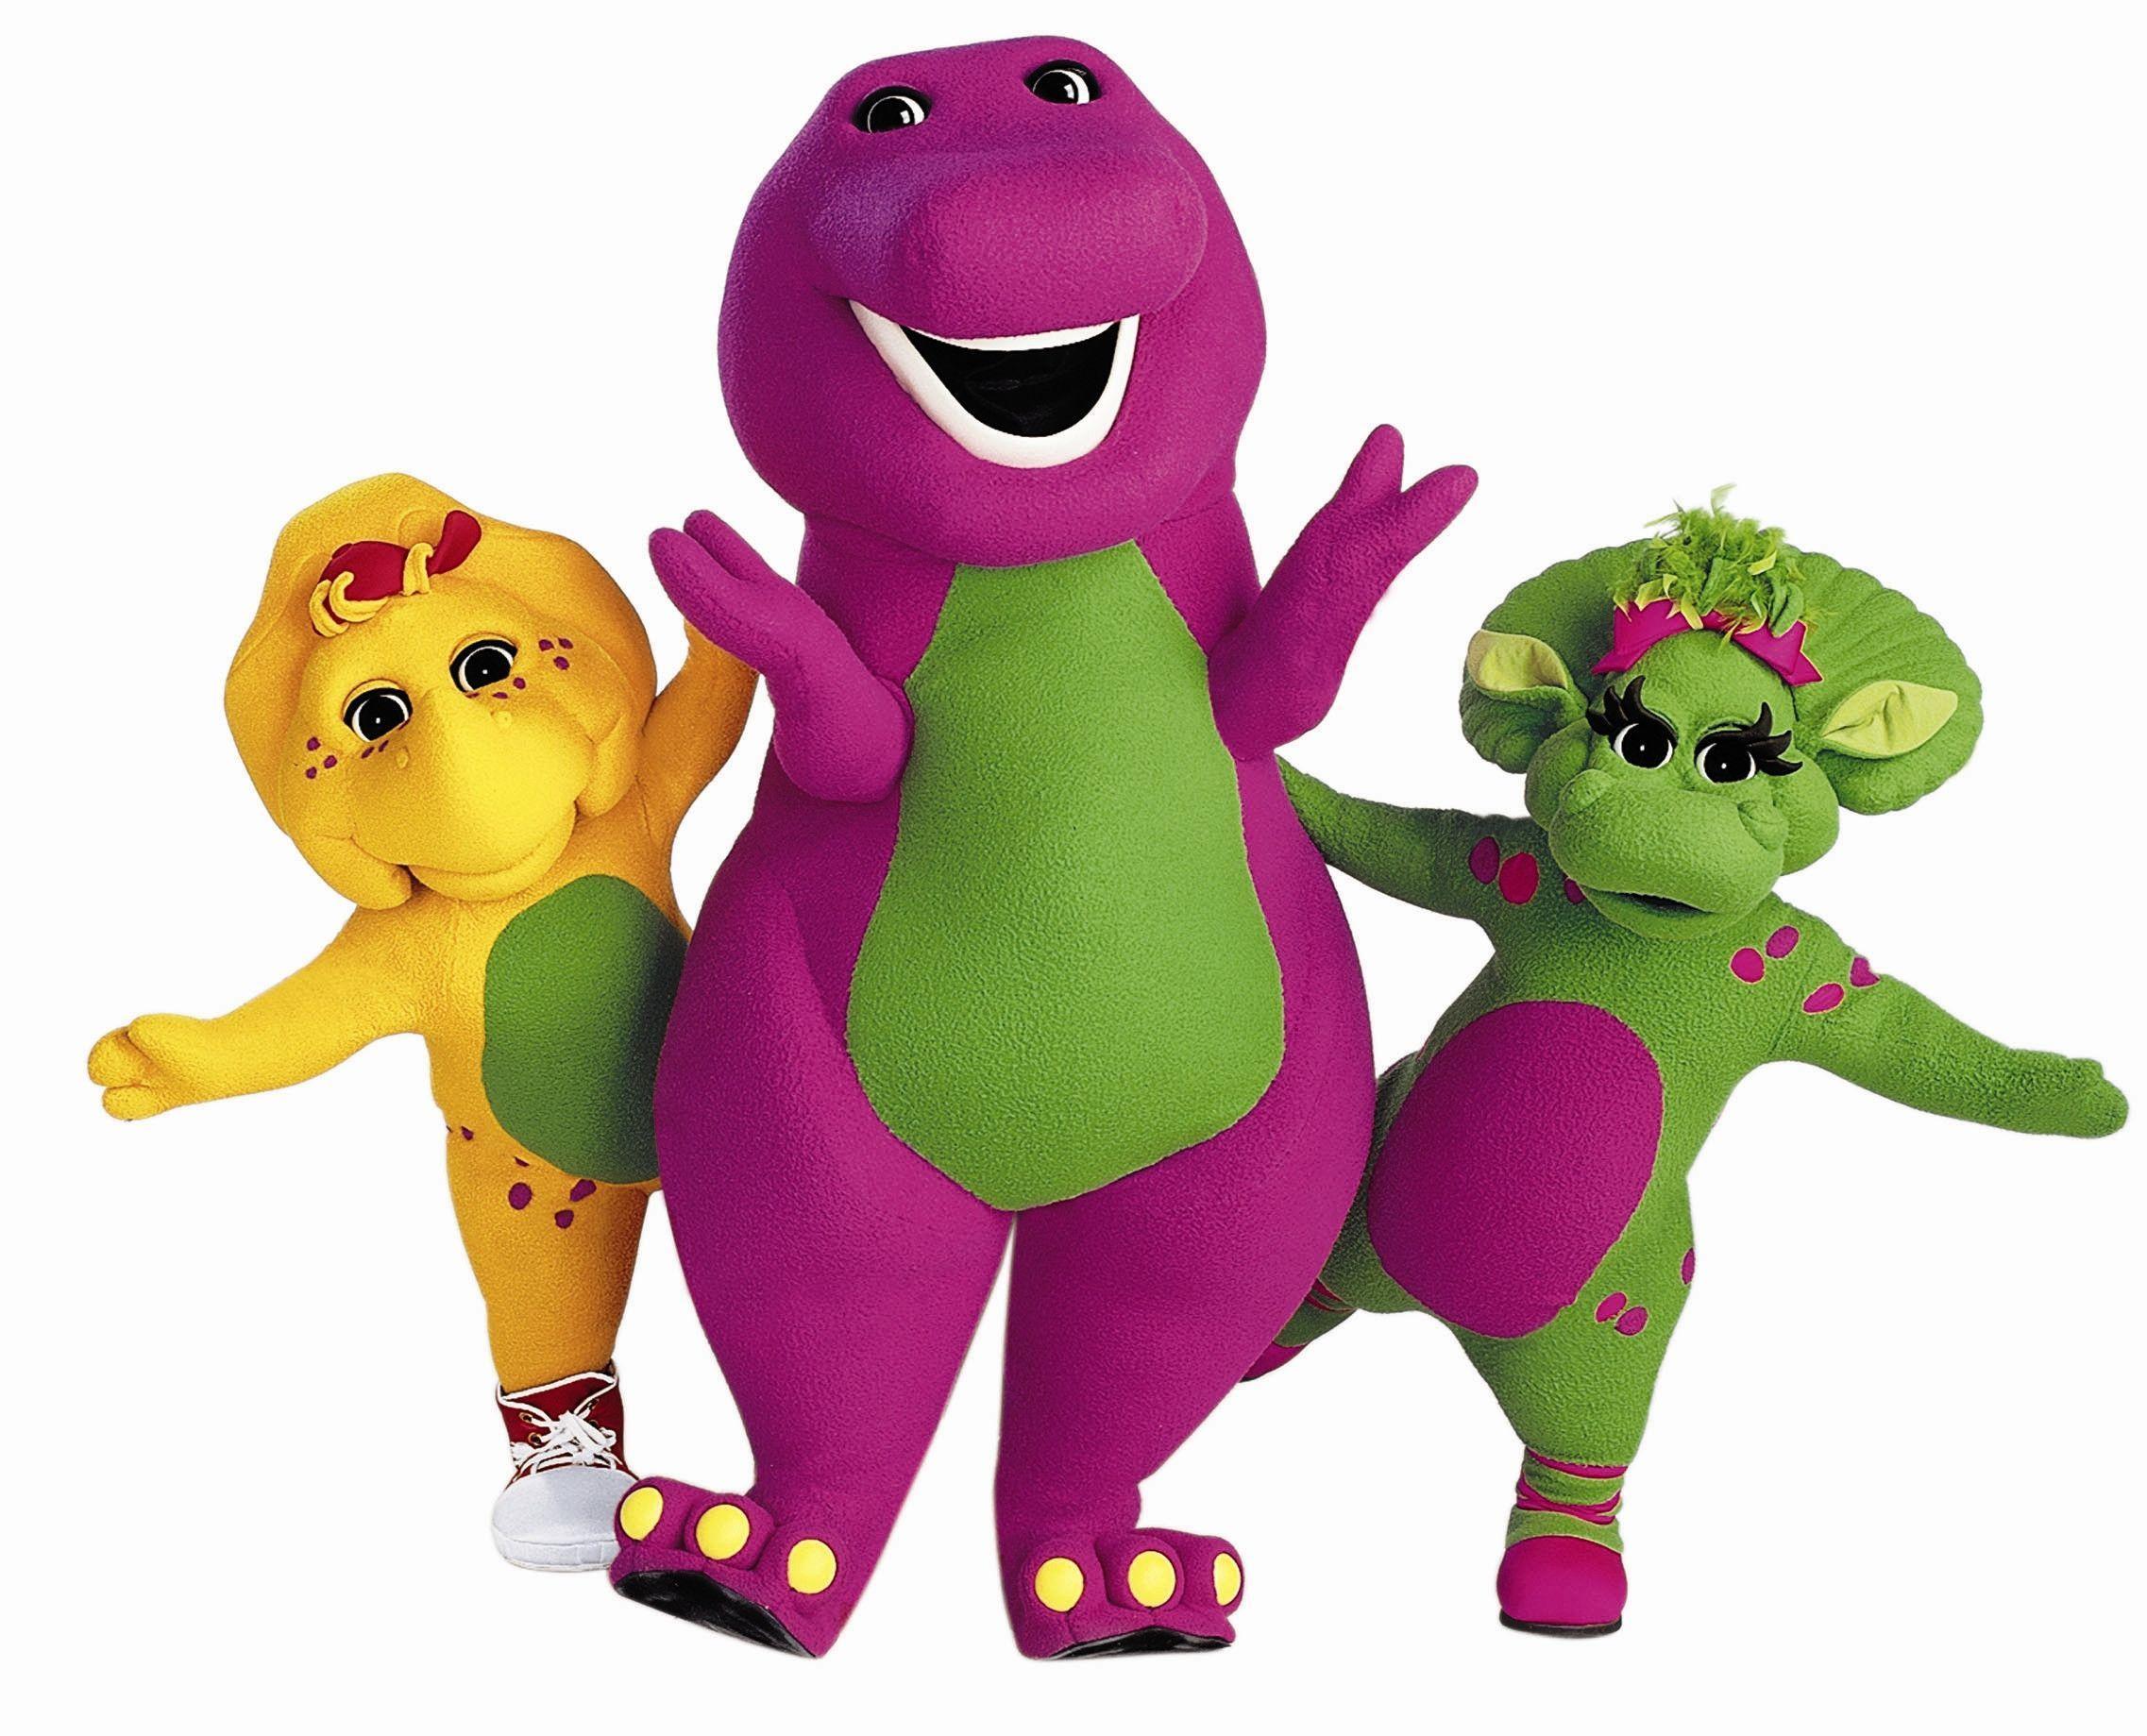 Barney and Friends Christmas Wallpaper Downloads for Mobile Phones